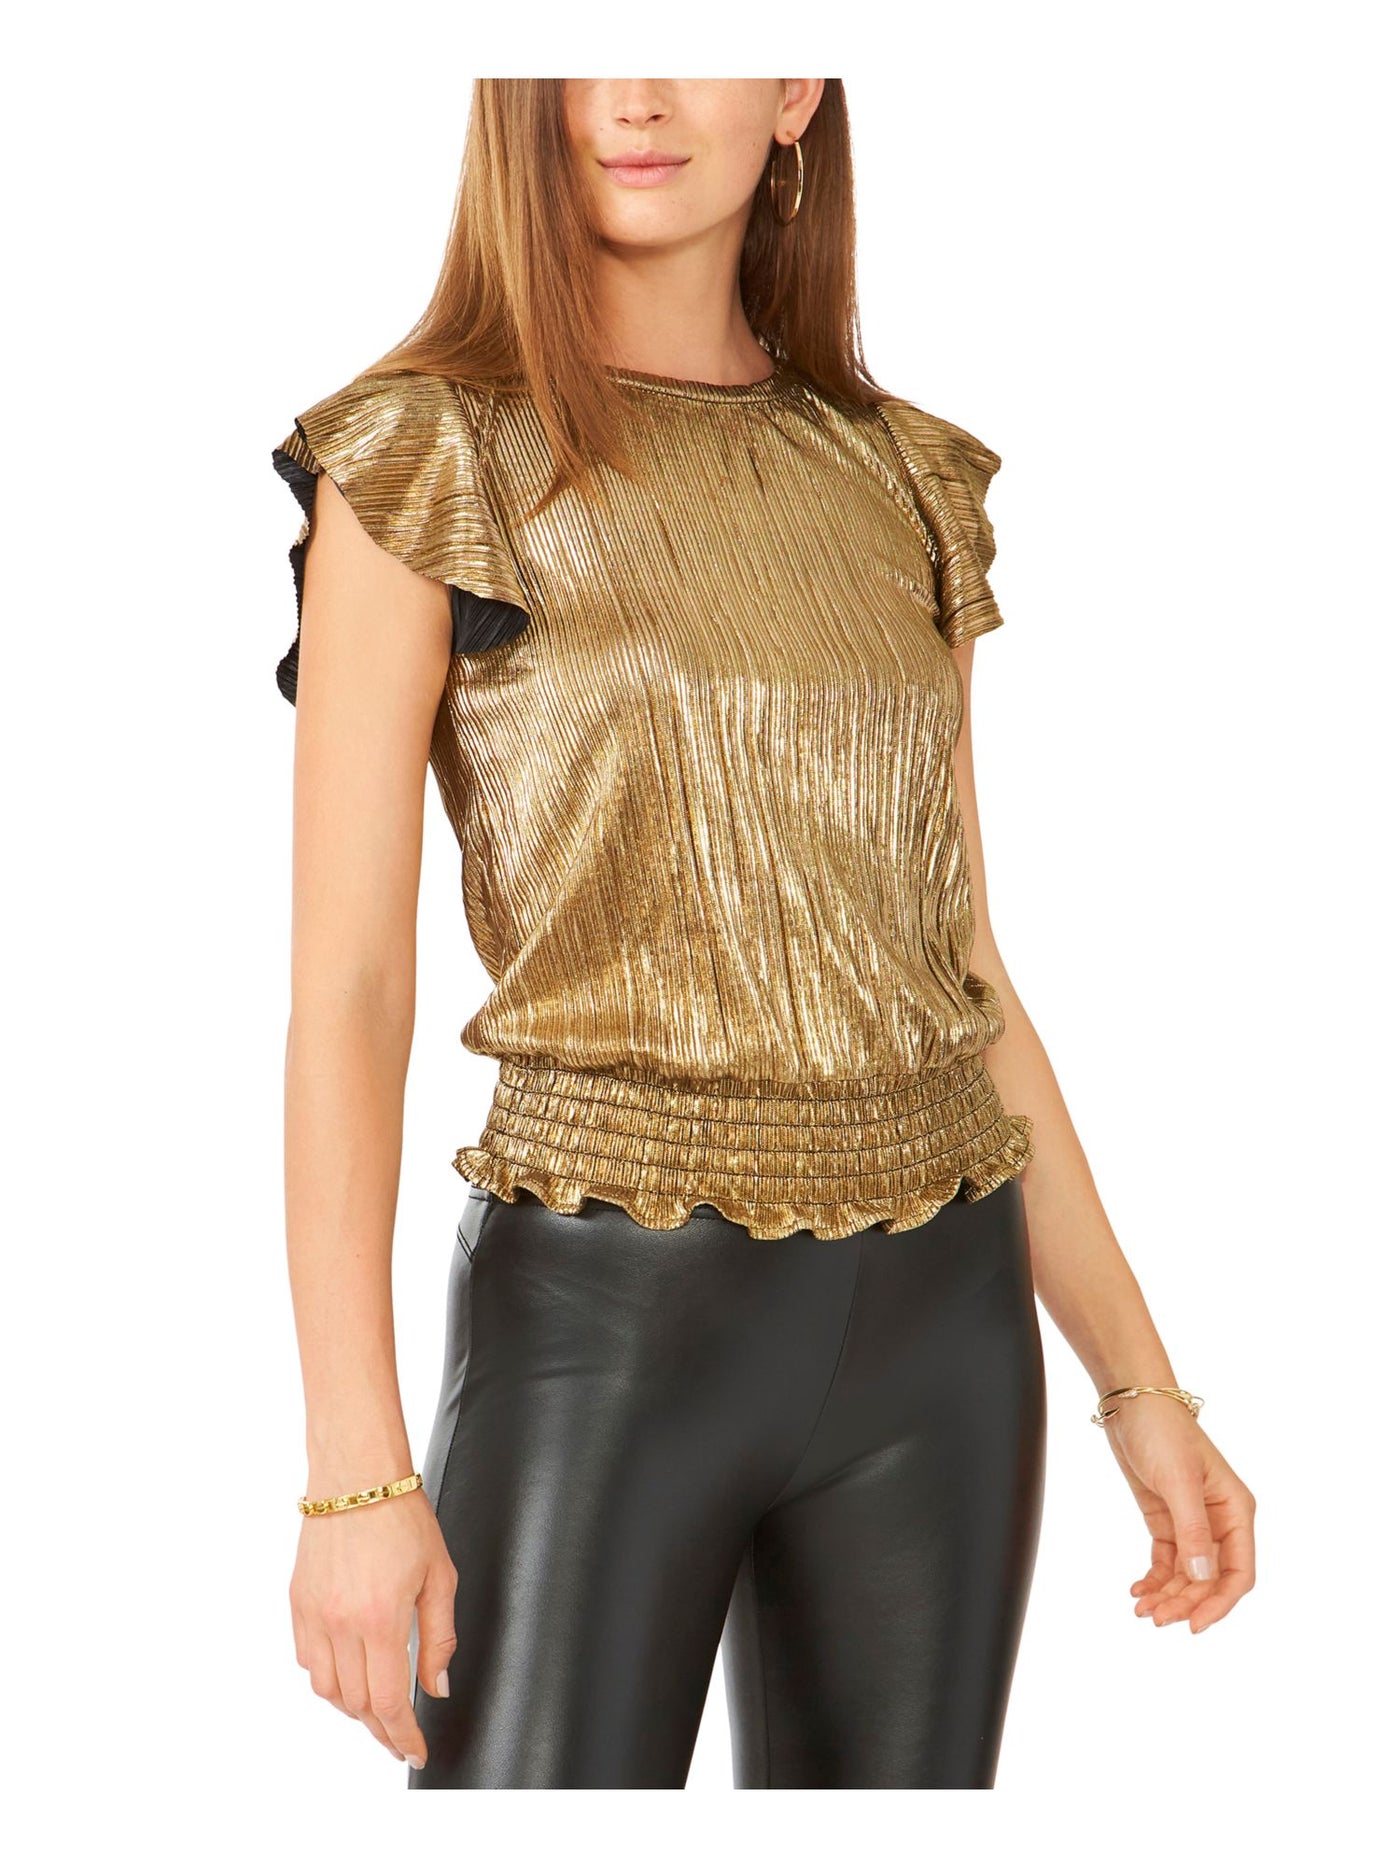 28TH & PARK Womens Gold Ribbed Smocked Hem Flutter Sleeve Jewel Neck Party Top Juniors XS